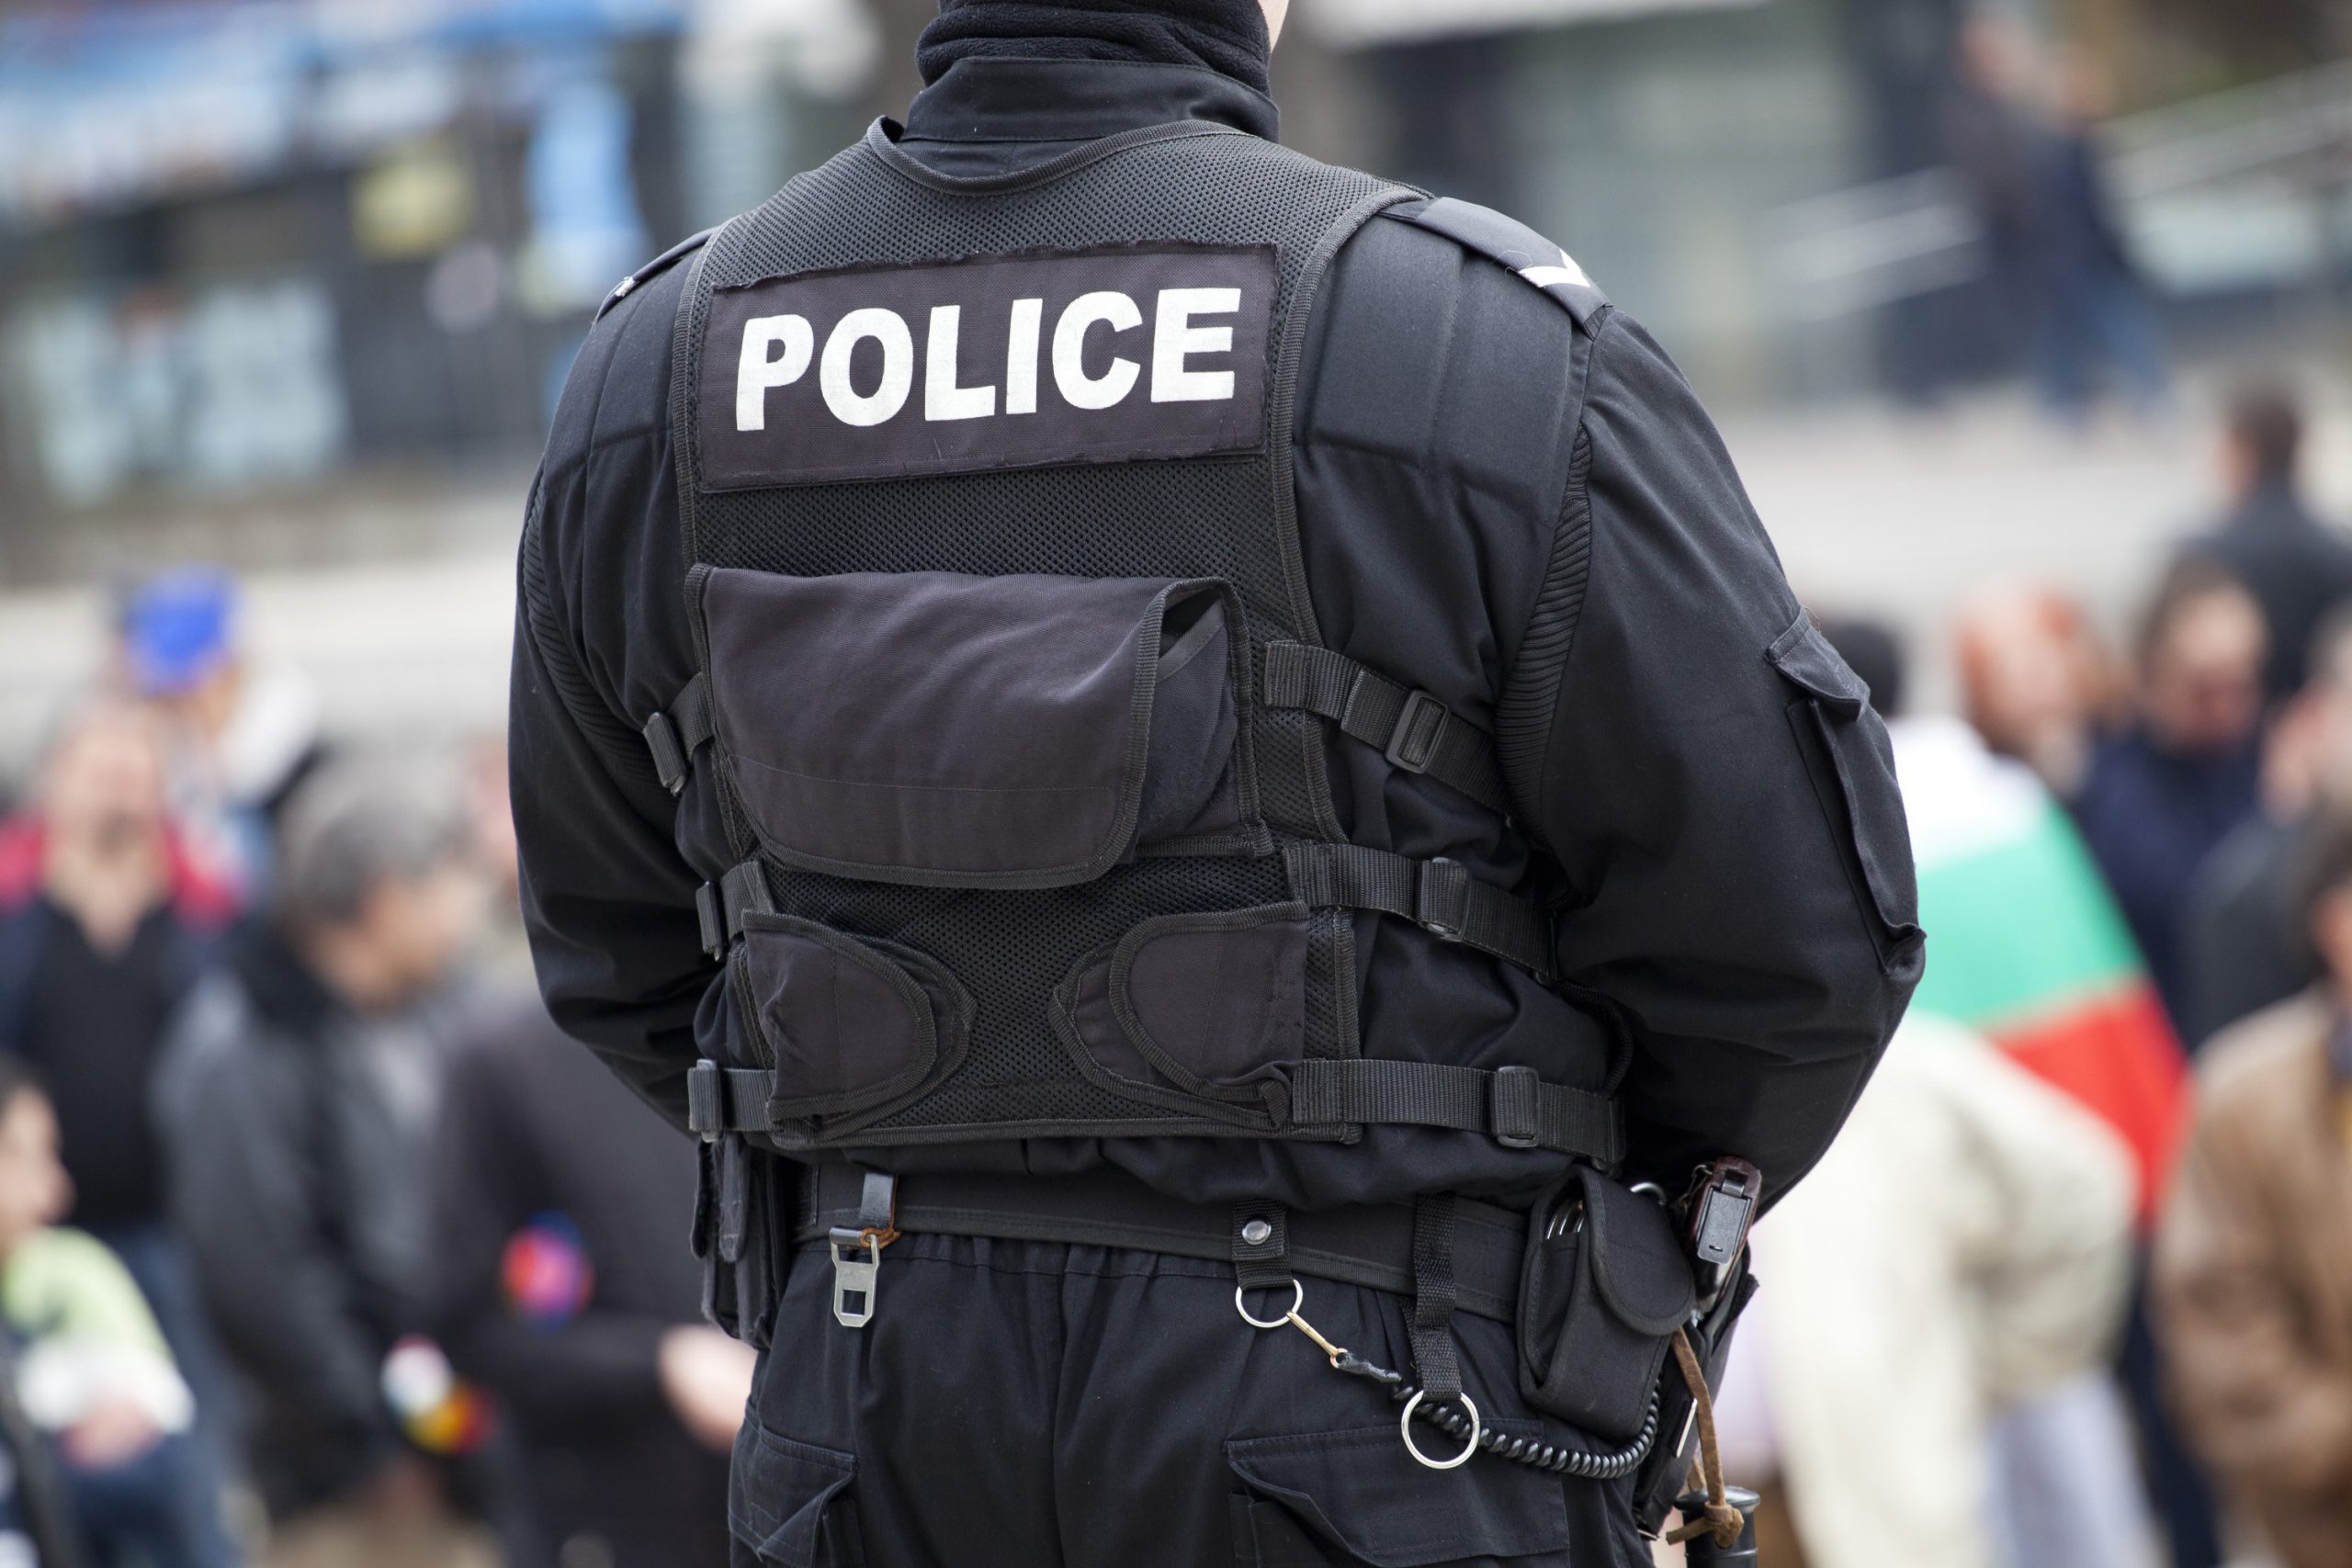 photograph of police officer in gear